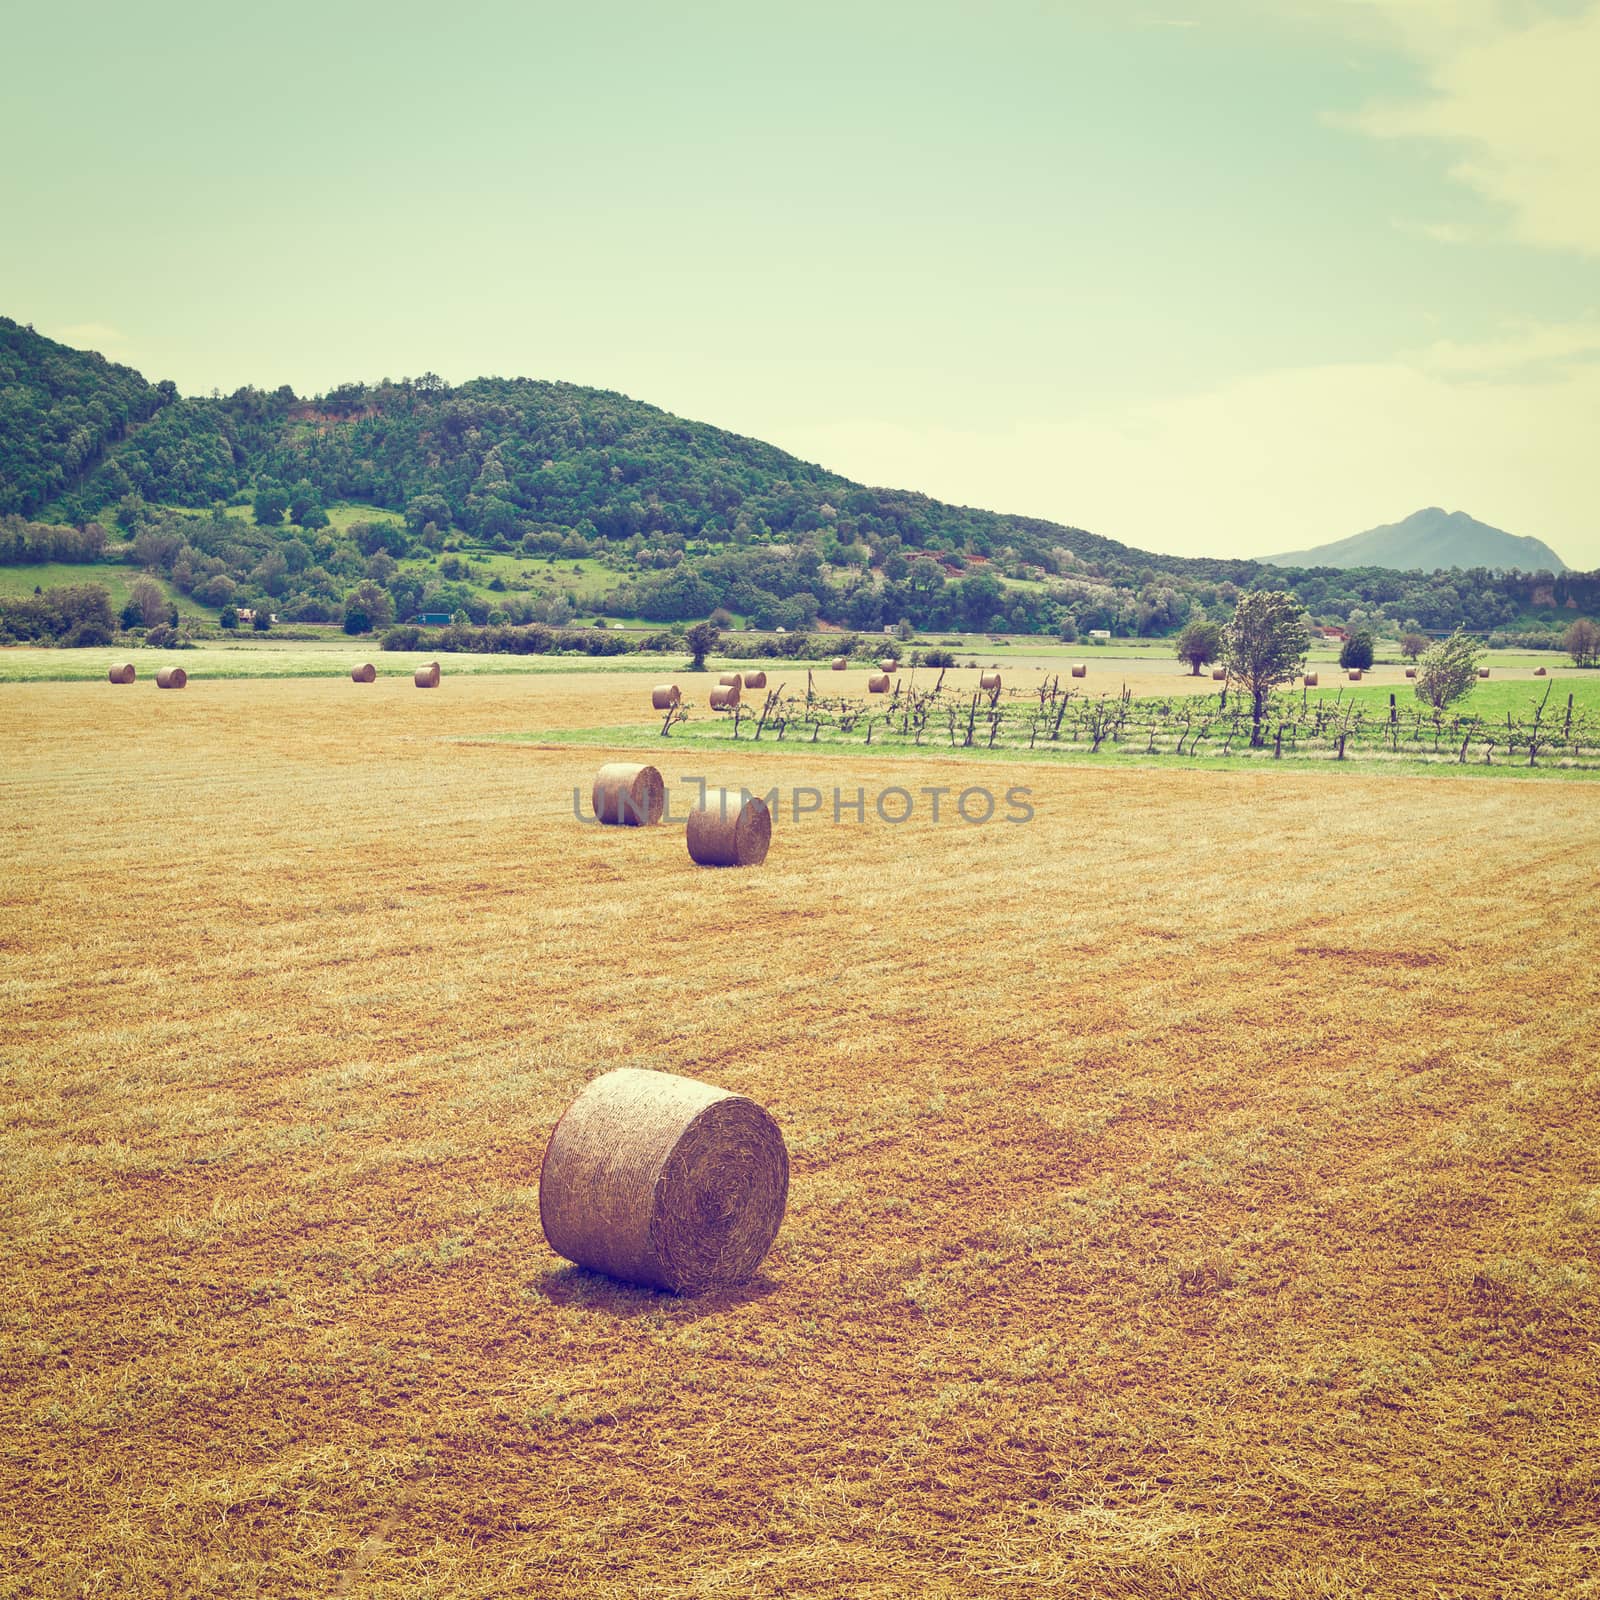 Landscape with Many Hay Bales and Vineyard in Italy, Instagram Effect